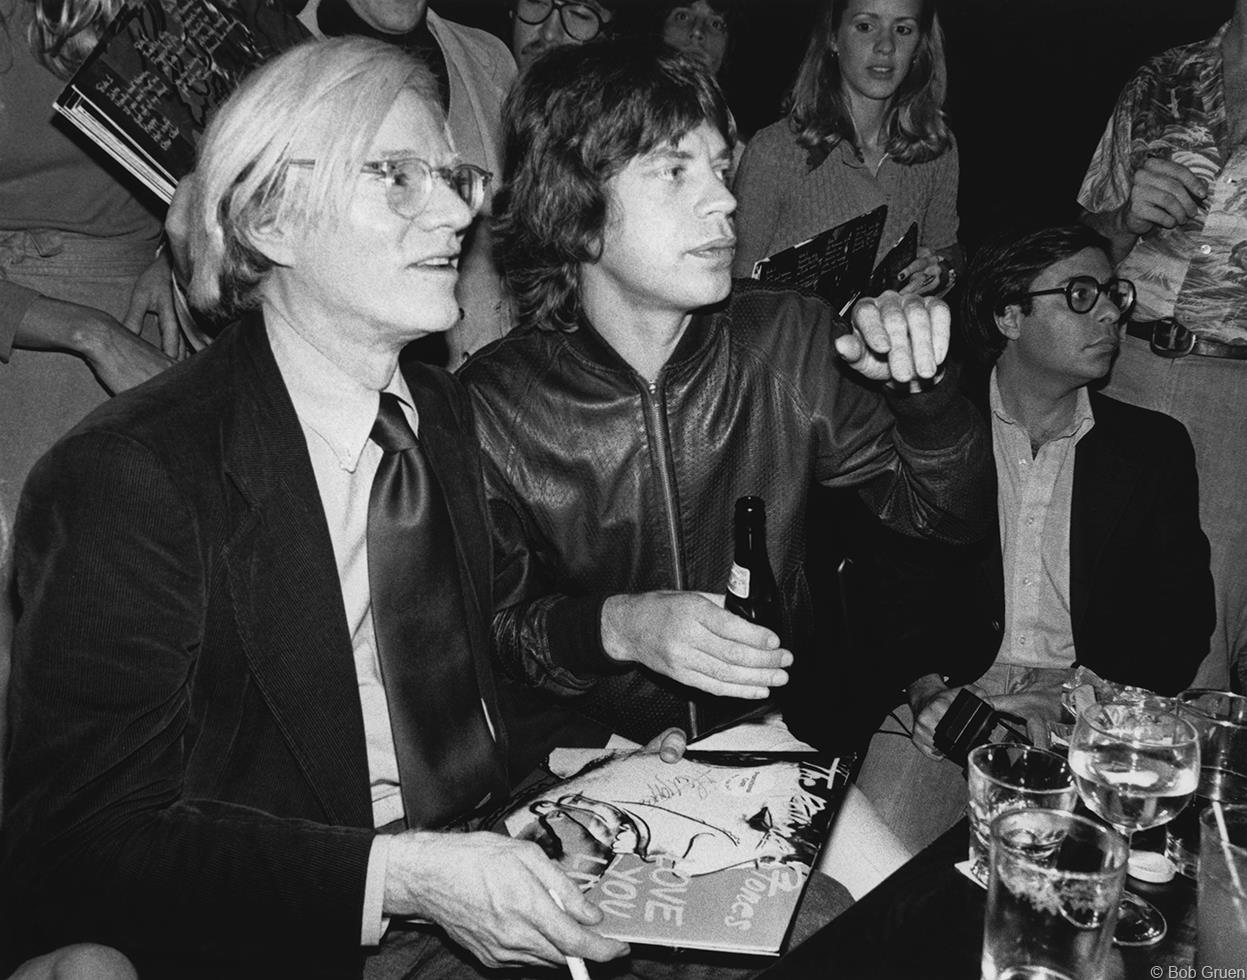 Andy Warhol and Mick Jagger sitting on a couch.